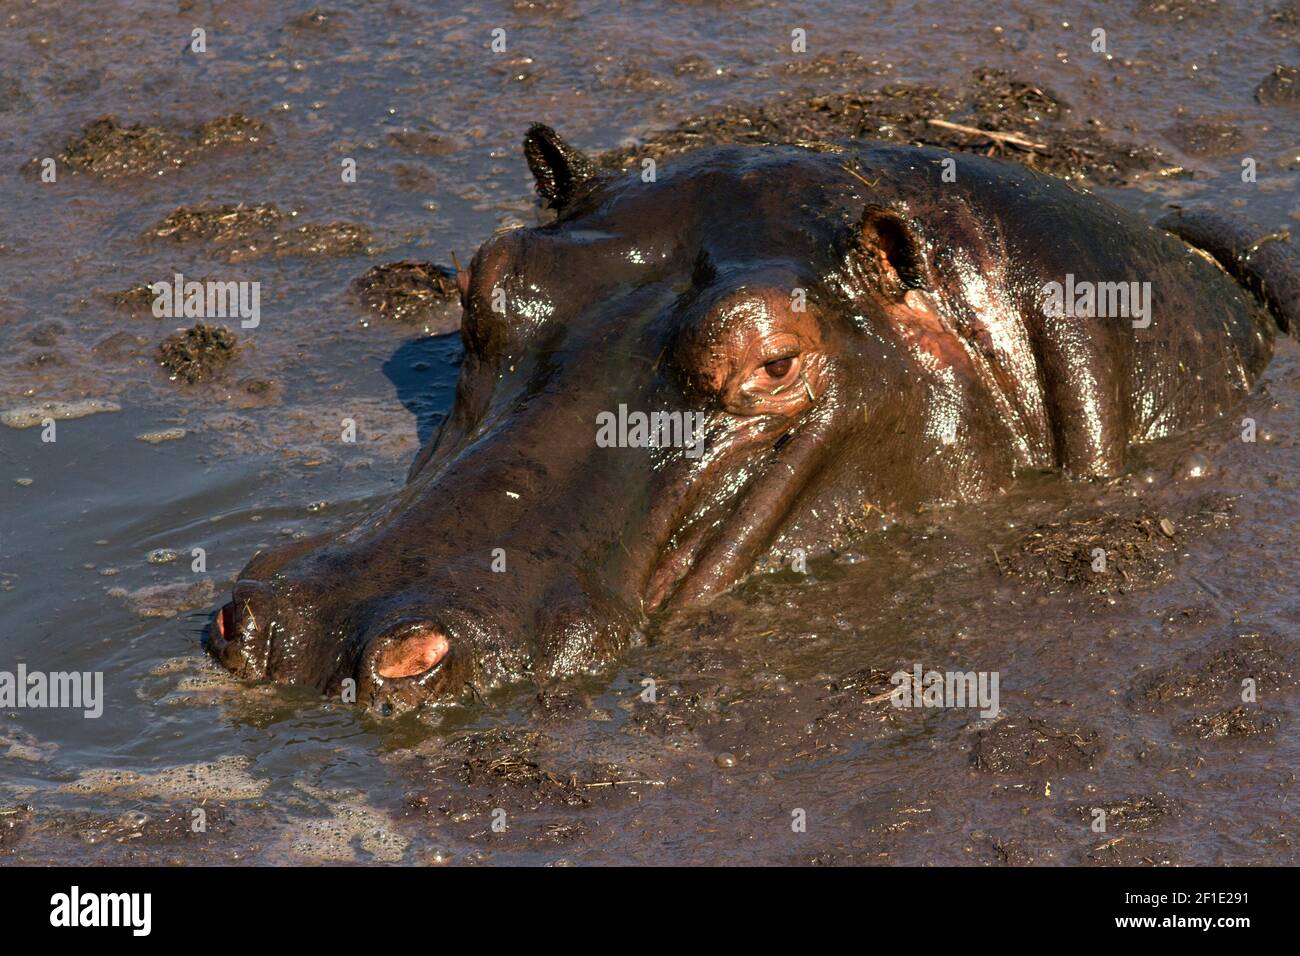 The springs at Ikuu in Katavi National Park are vital to the local Hippo population as a reliable wallow they can spend the dry season. Stock Photo